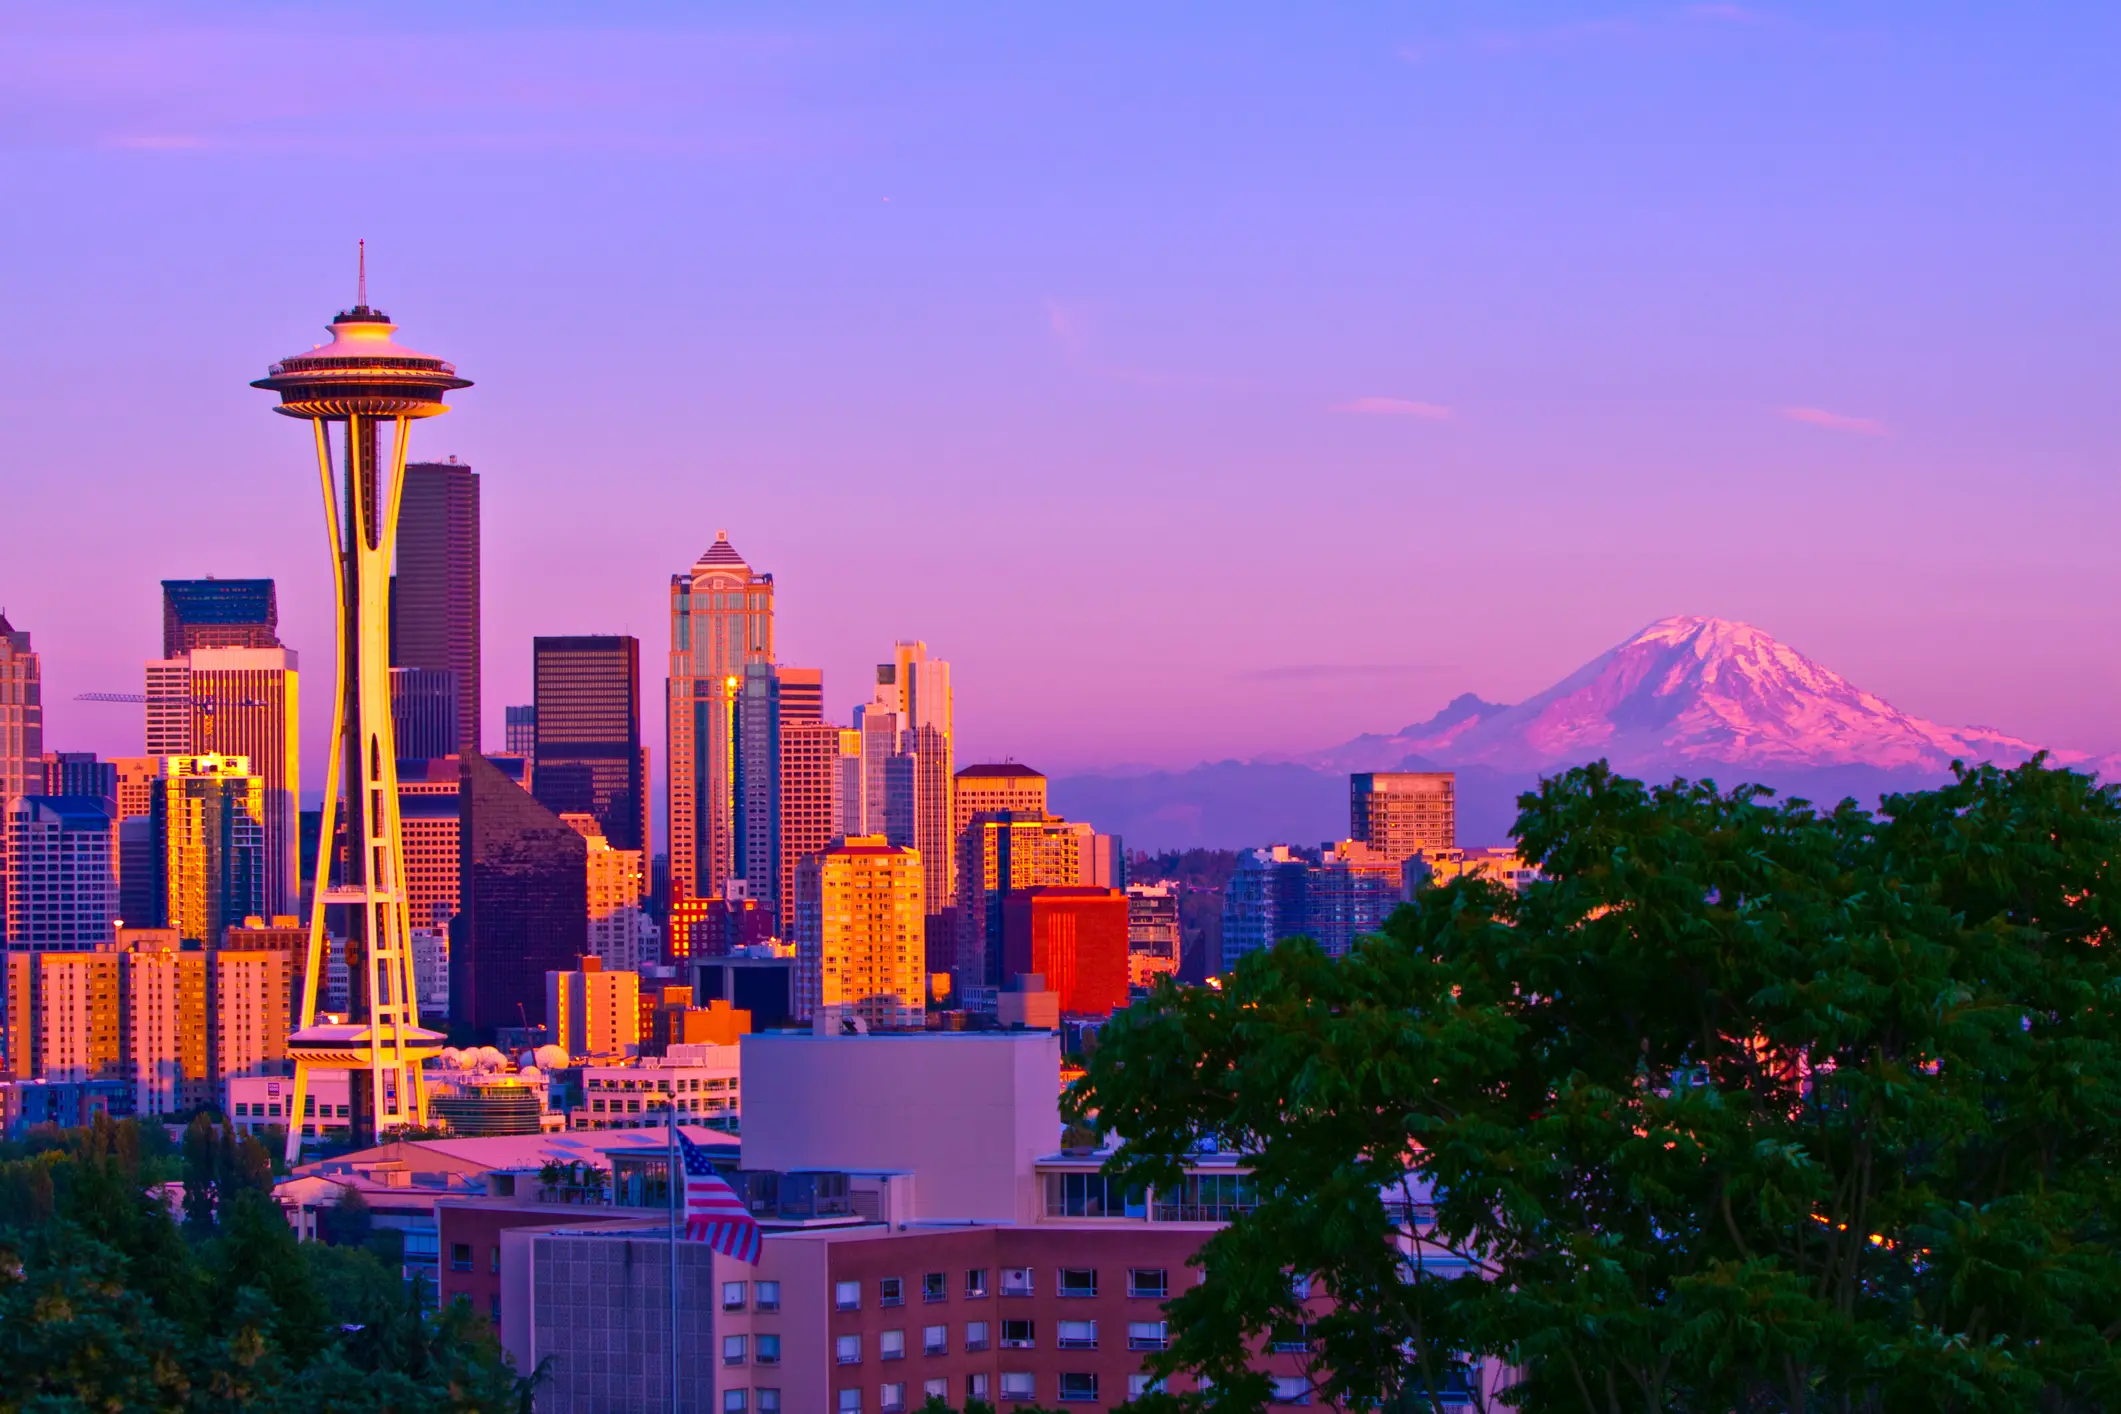 A view of the Seattle skyline at sunset